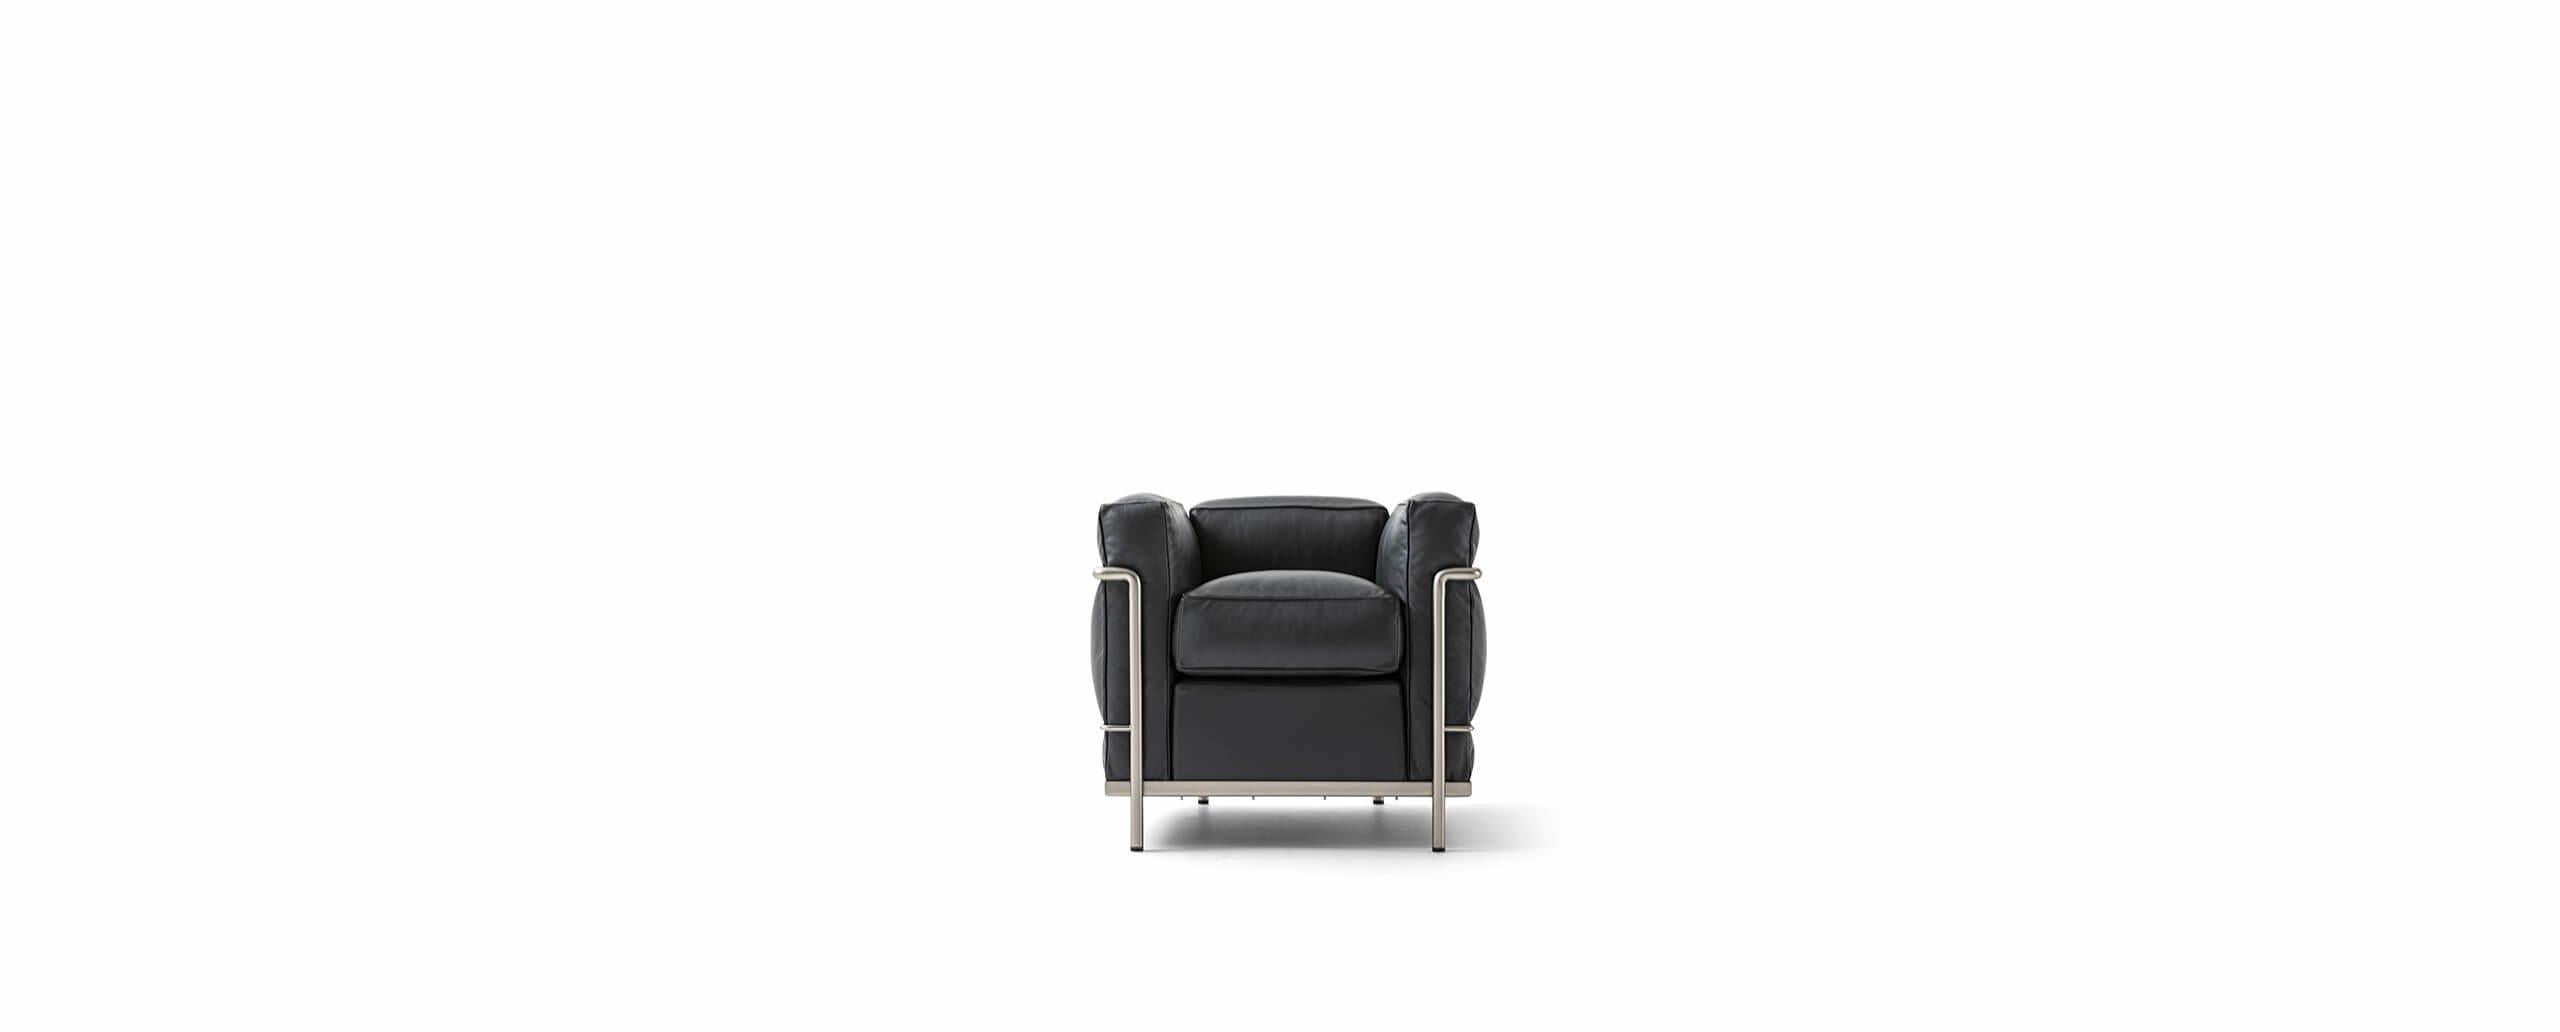 Armchair designed by Le Corbusier, Pierre Jeanneret, Charlotte Perriand in 1928. Relaunched in 2020.
Manufactured by Cassina in Italy.

The LC3 implements the logic of modernity separating the supporting metal frame from its padded elements like